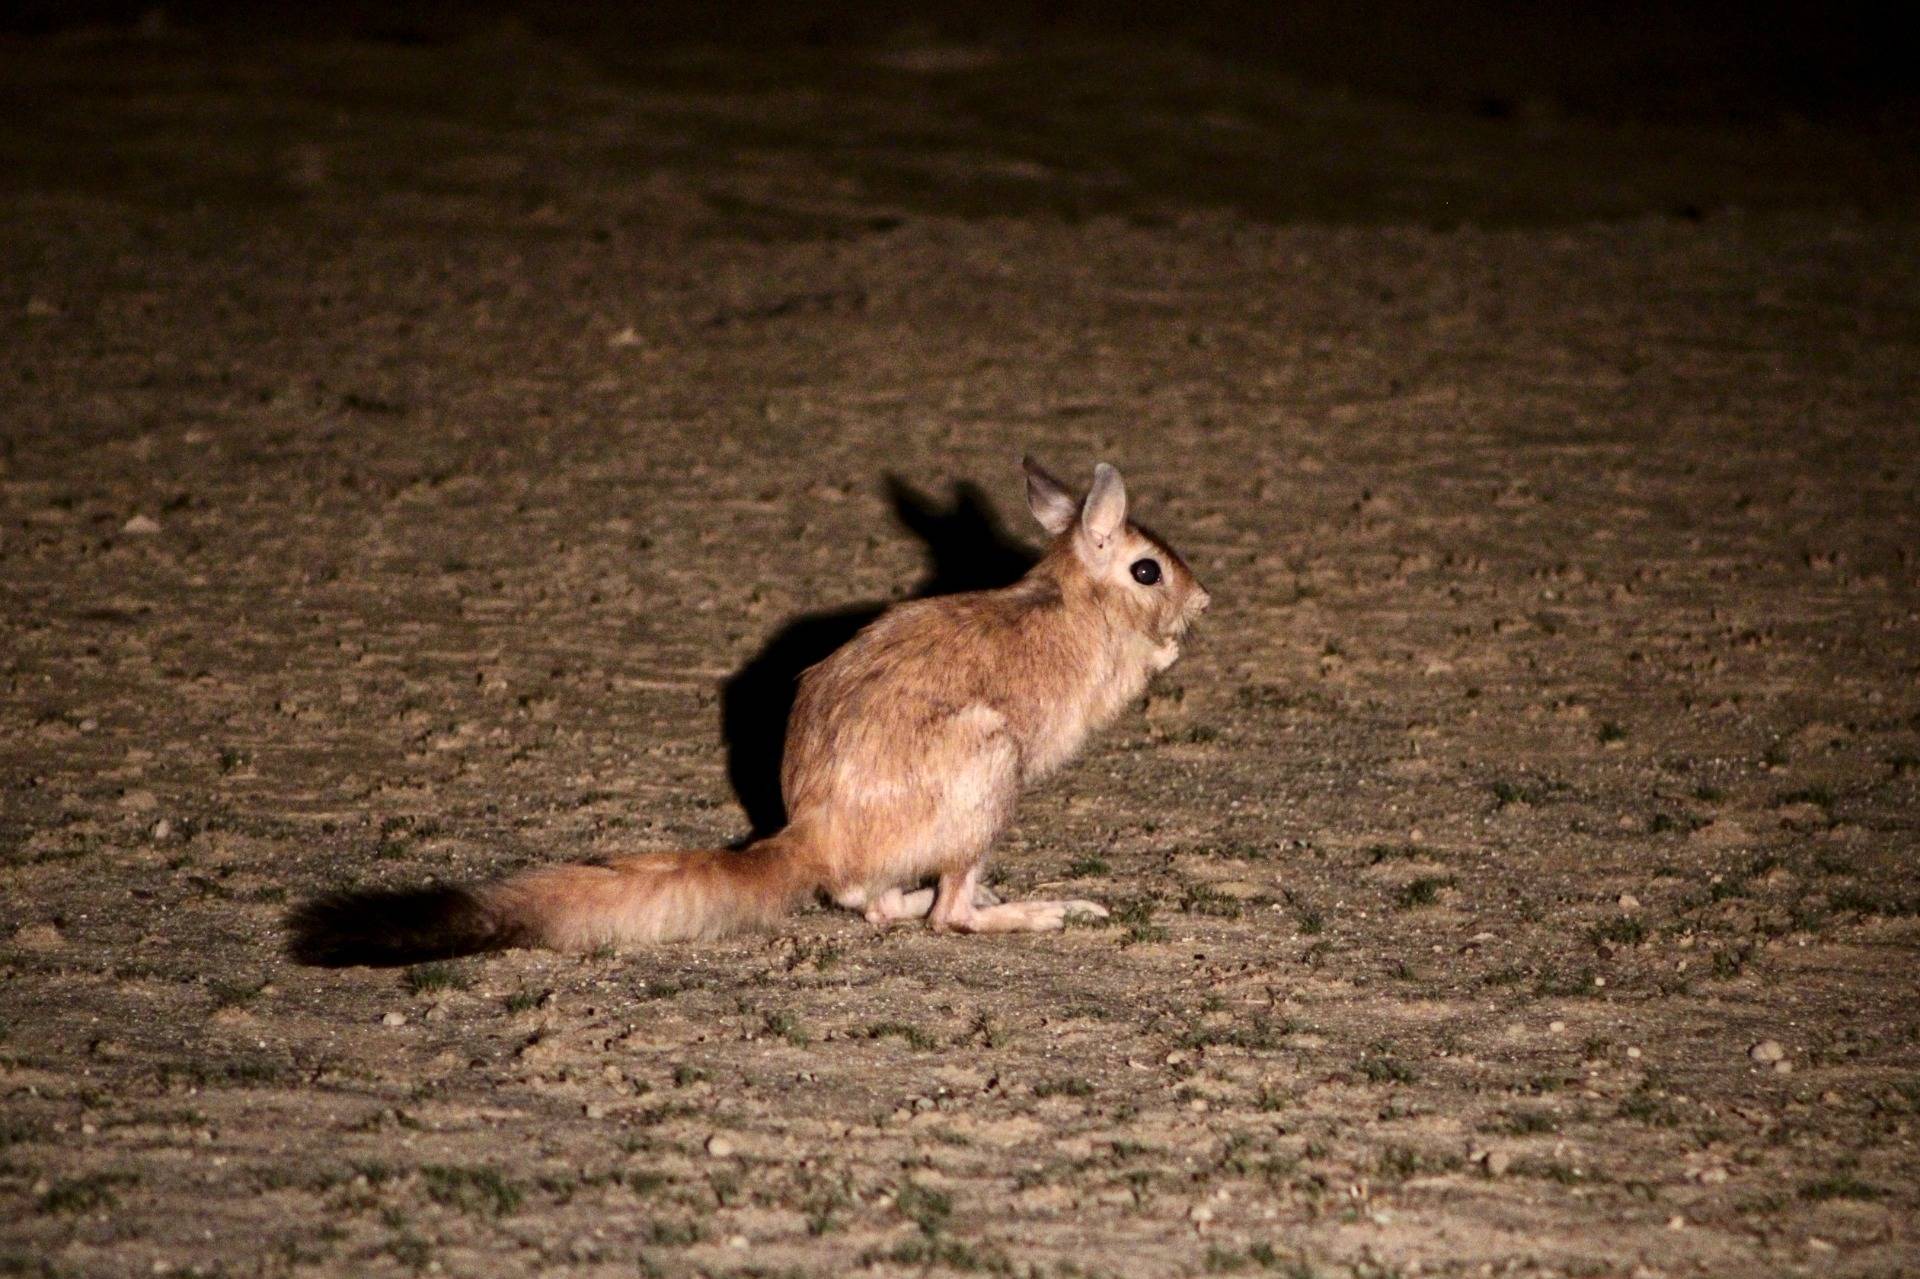 Spring Hare. It's as if a Rabbit and a Kangaroo had a baby :)